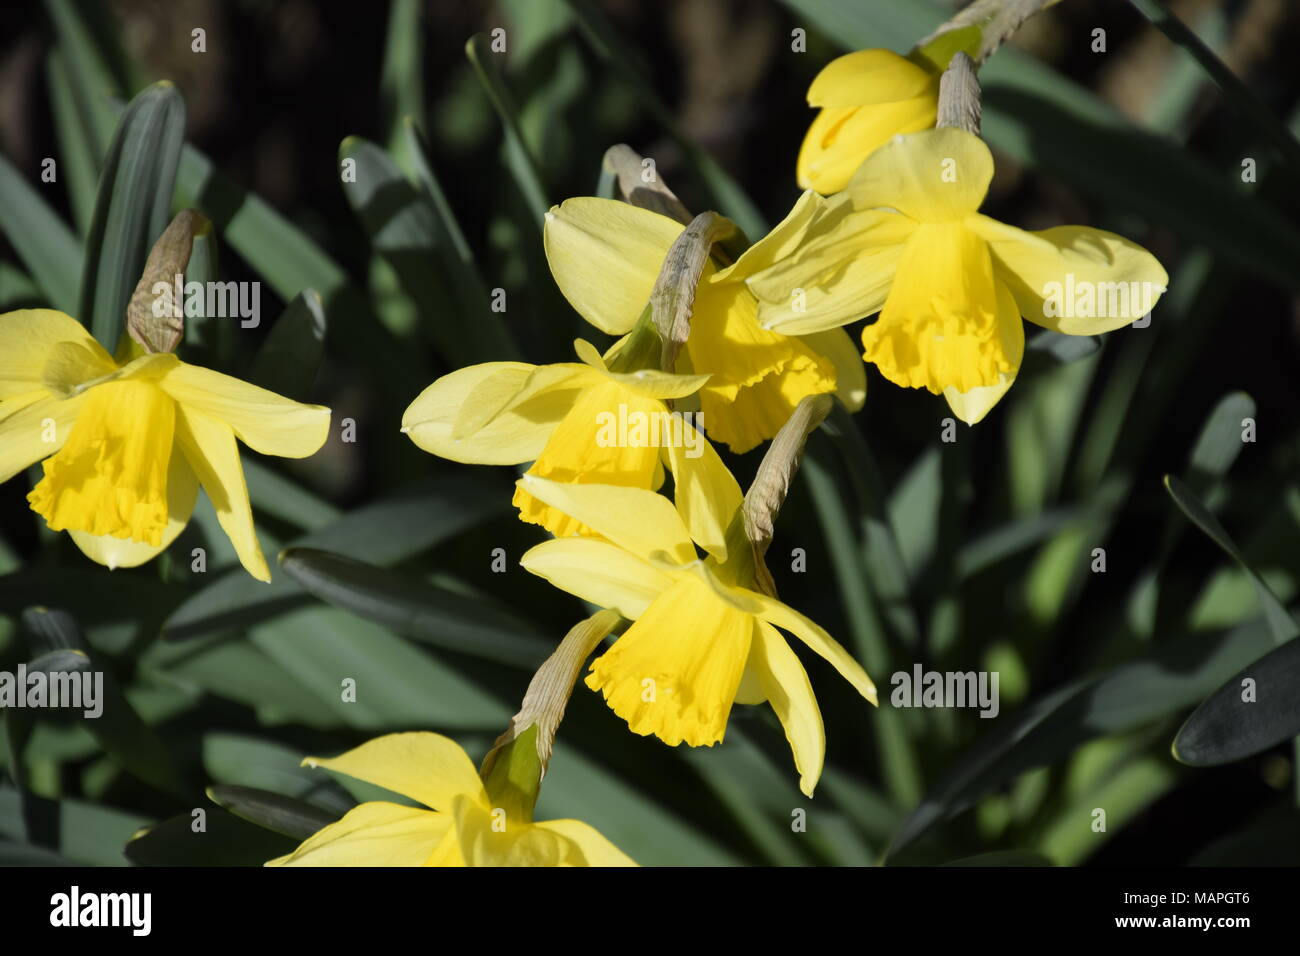 Flowers daffodil yellow. Spring flowering bulb plants in the flowerbed. Stock Photo